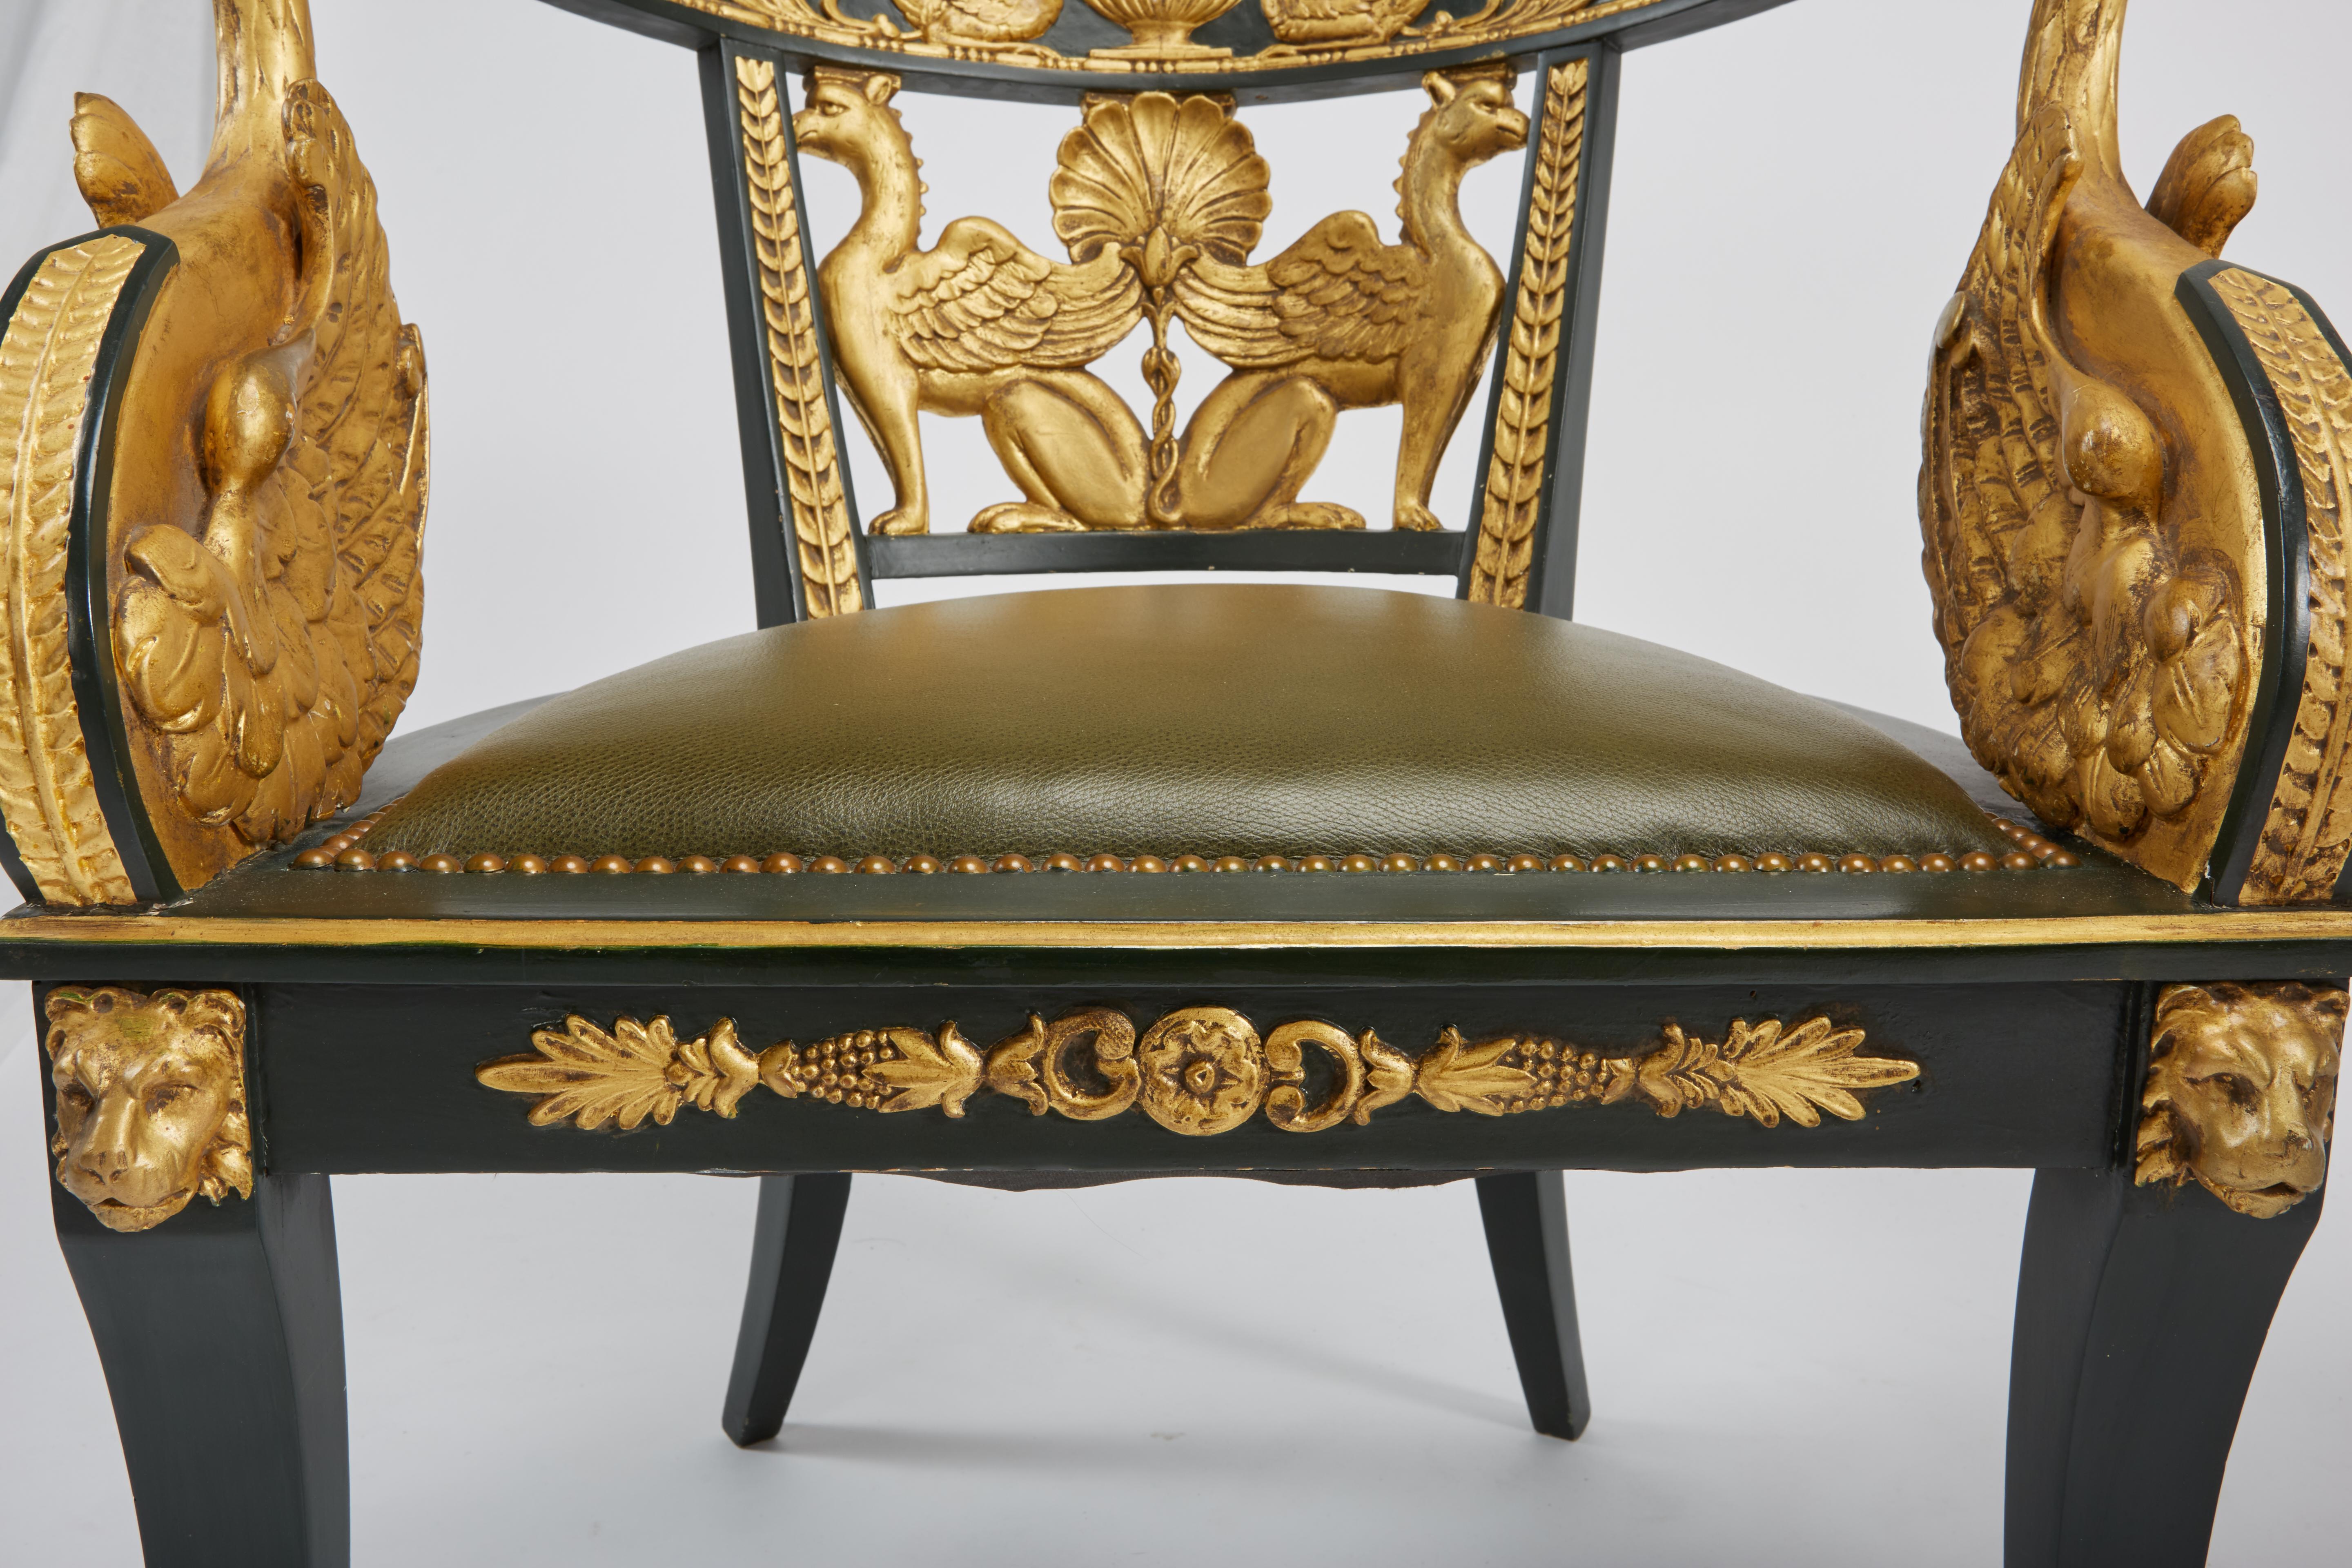 Italian Pair of Giltwood & Green Imperial Roman Style Tub Chairs with Greek Key & Swans